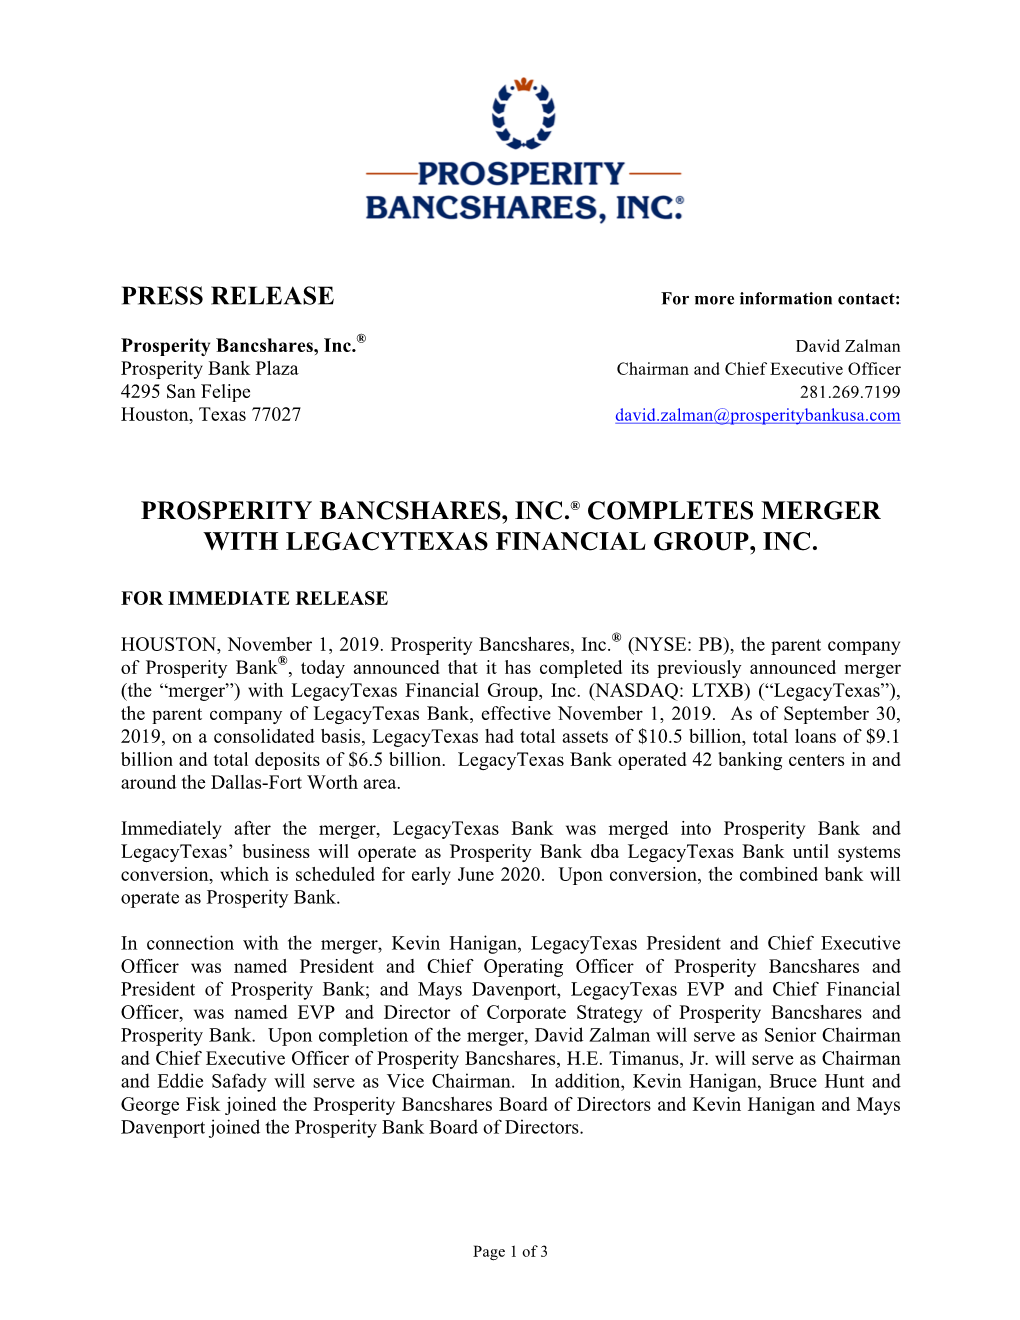 Press Release Prosperity Bancshares, Inc.® Completes Merger with Legacytexas Financial Group, Inc